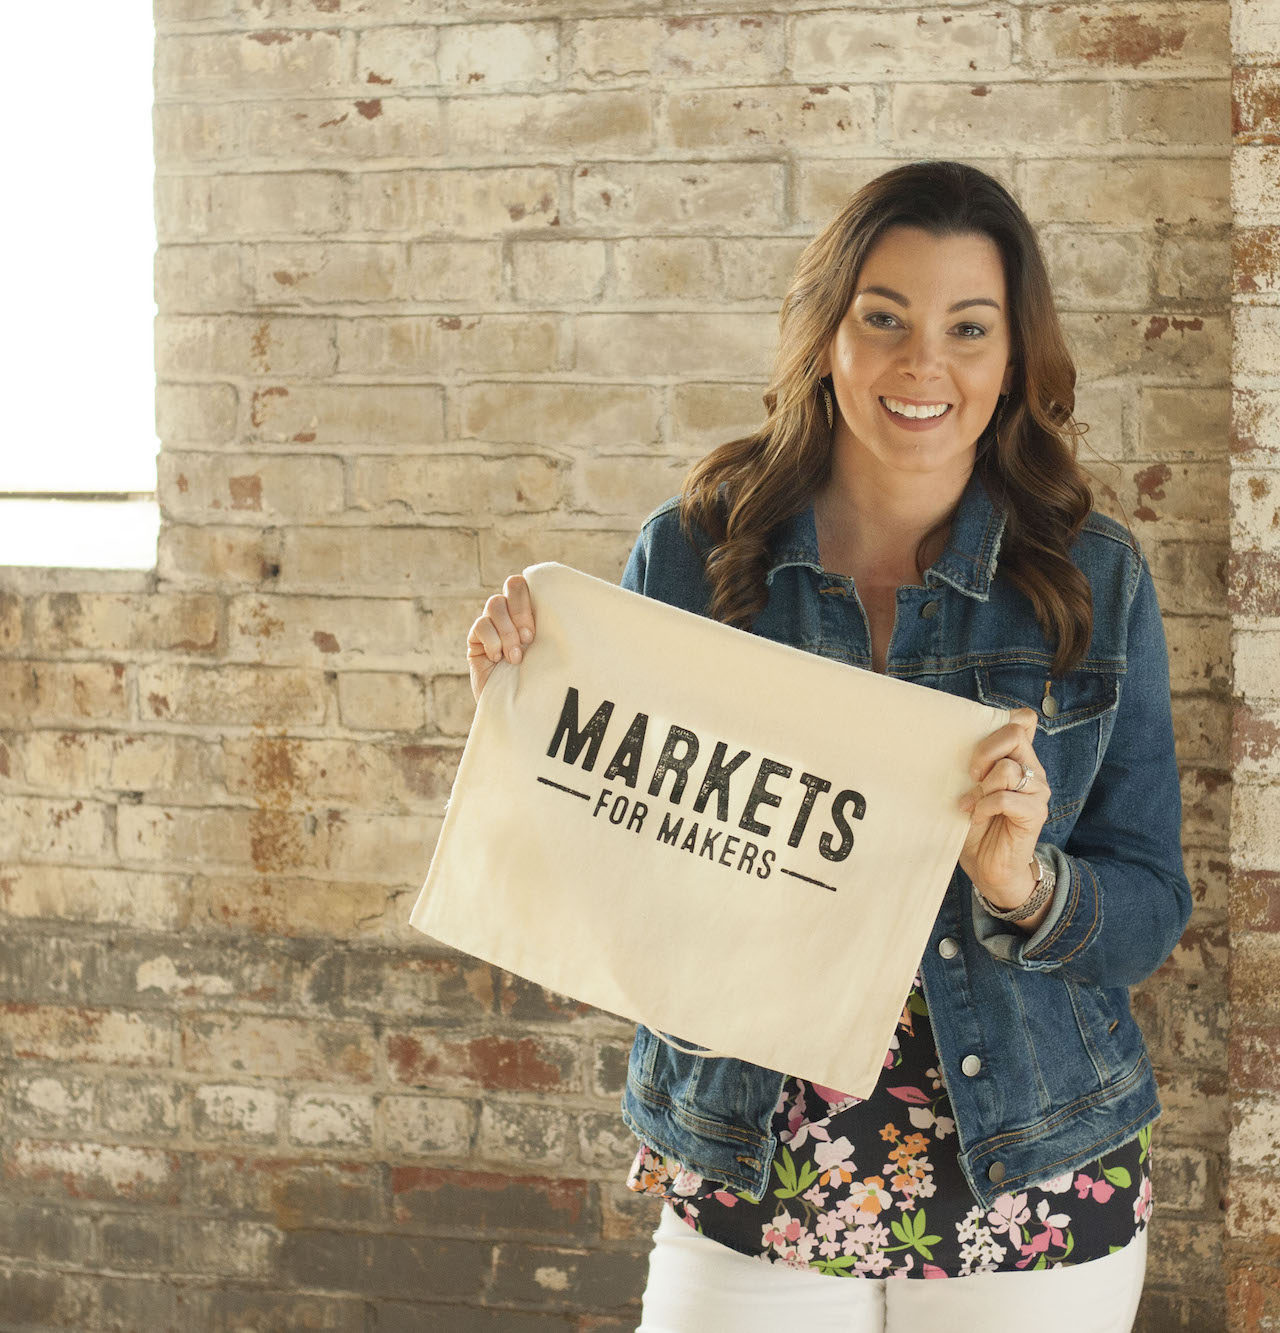 Shop Local: Markets for Makers